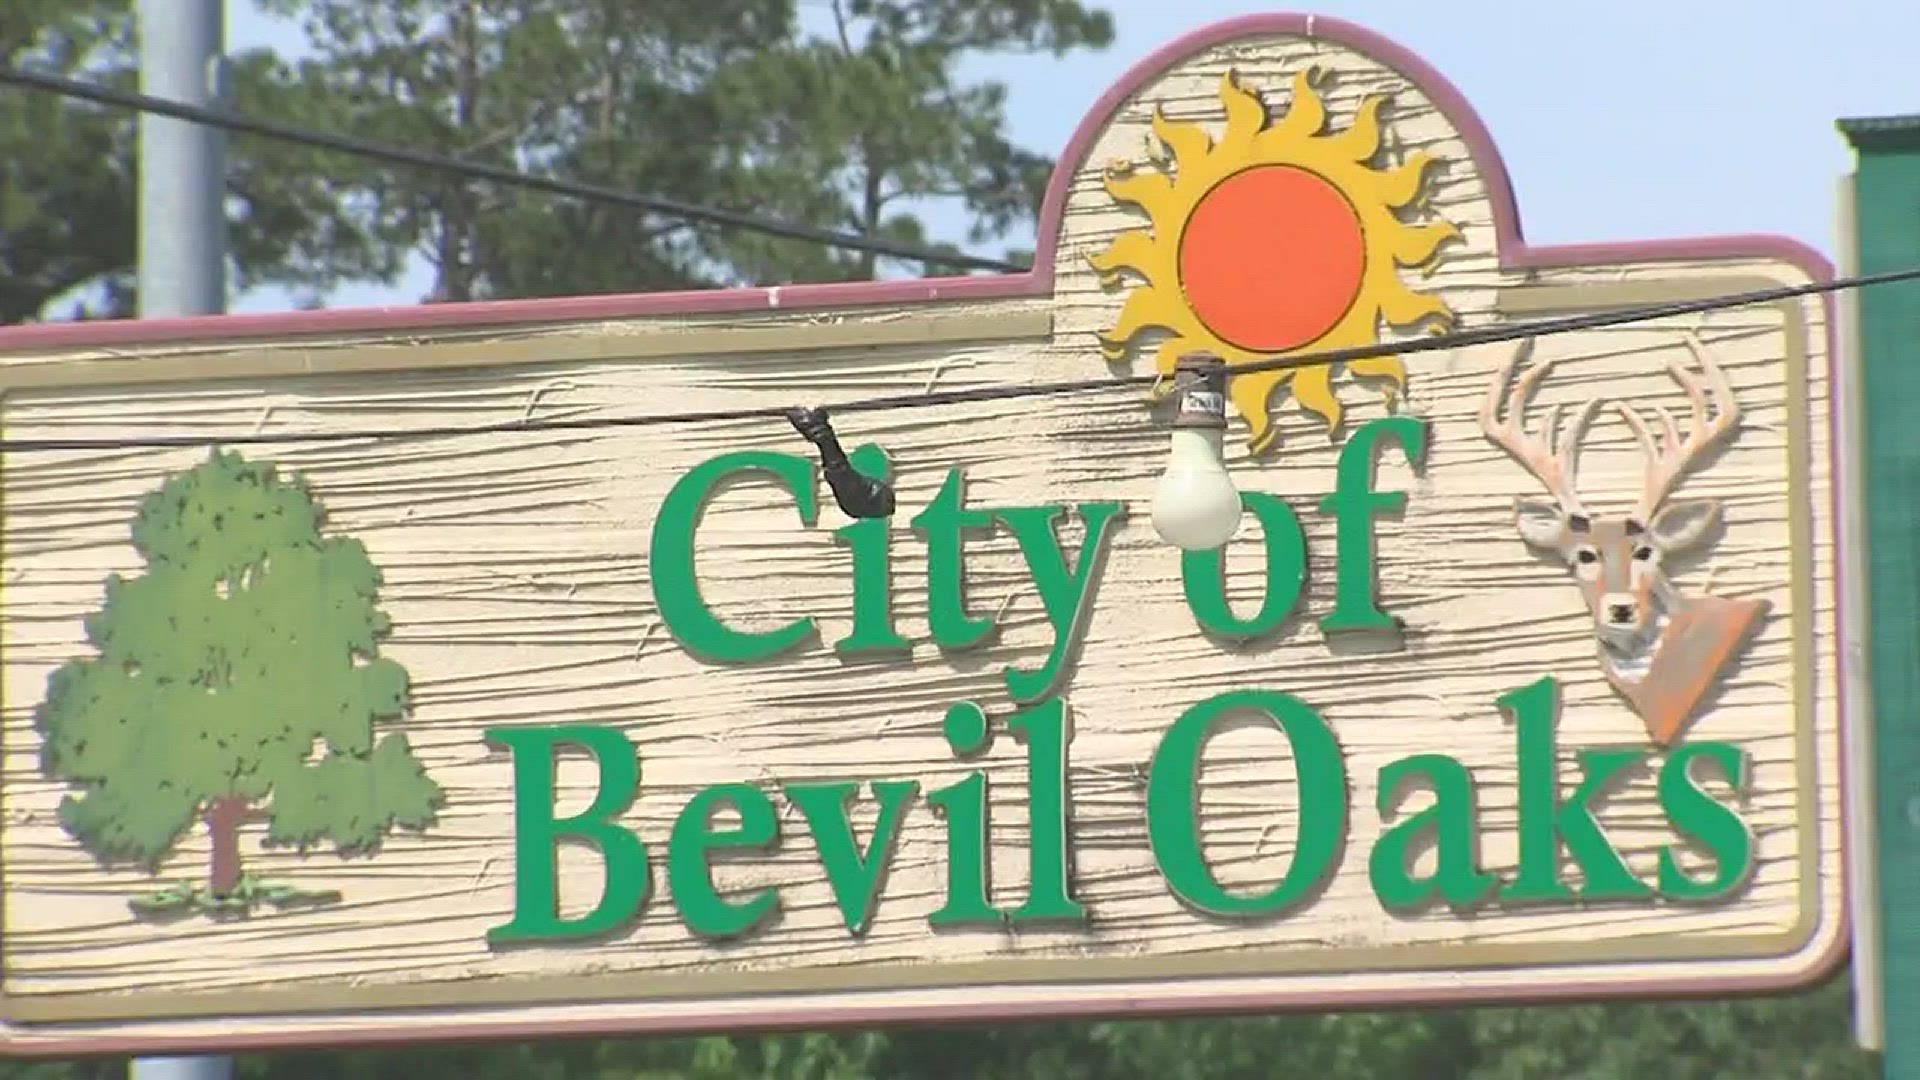 Up to 600 people have signed a petition that is asking to detach Bevil Oaks from Beaumont ISD and annex to Hardin-Jefferson ISD